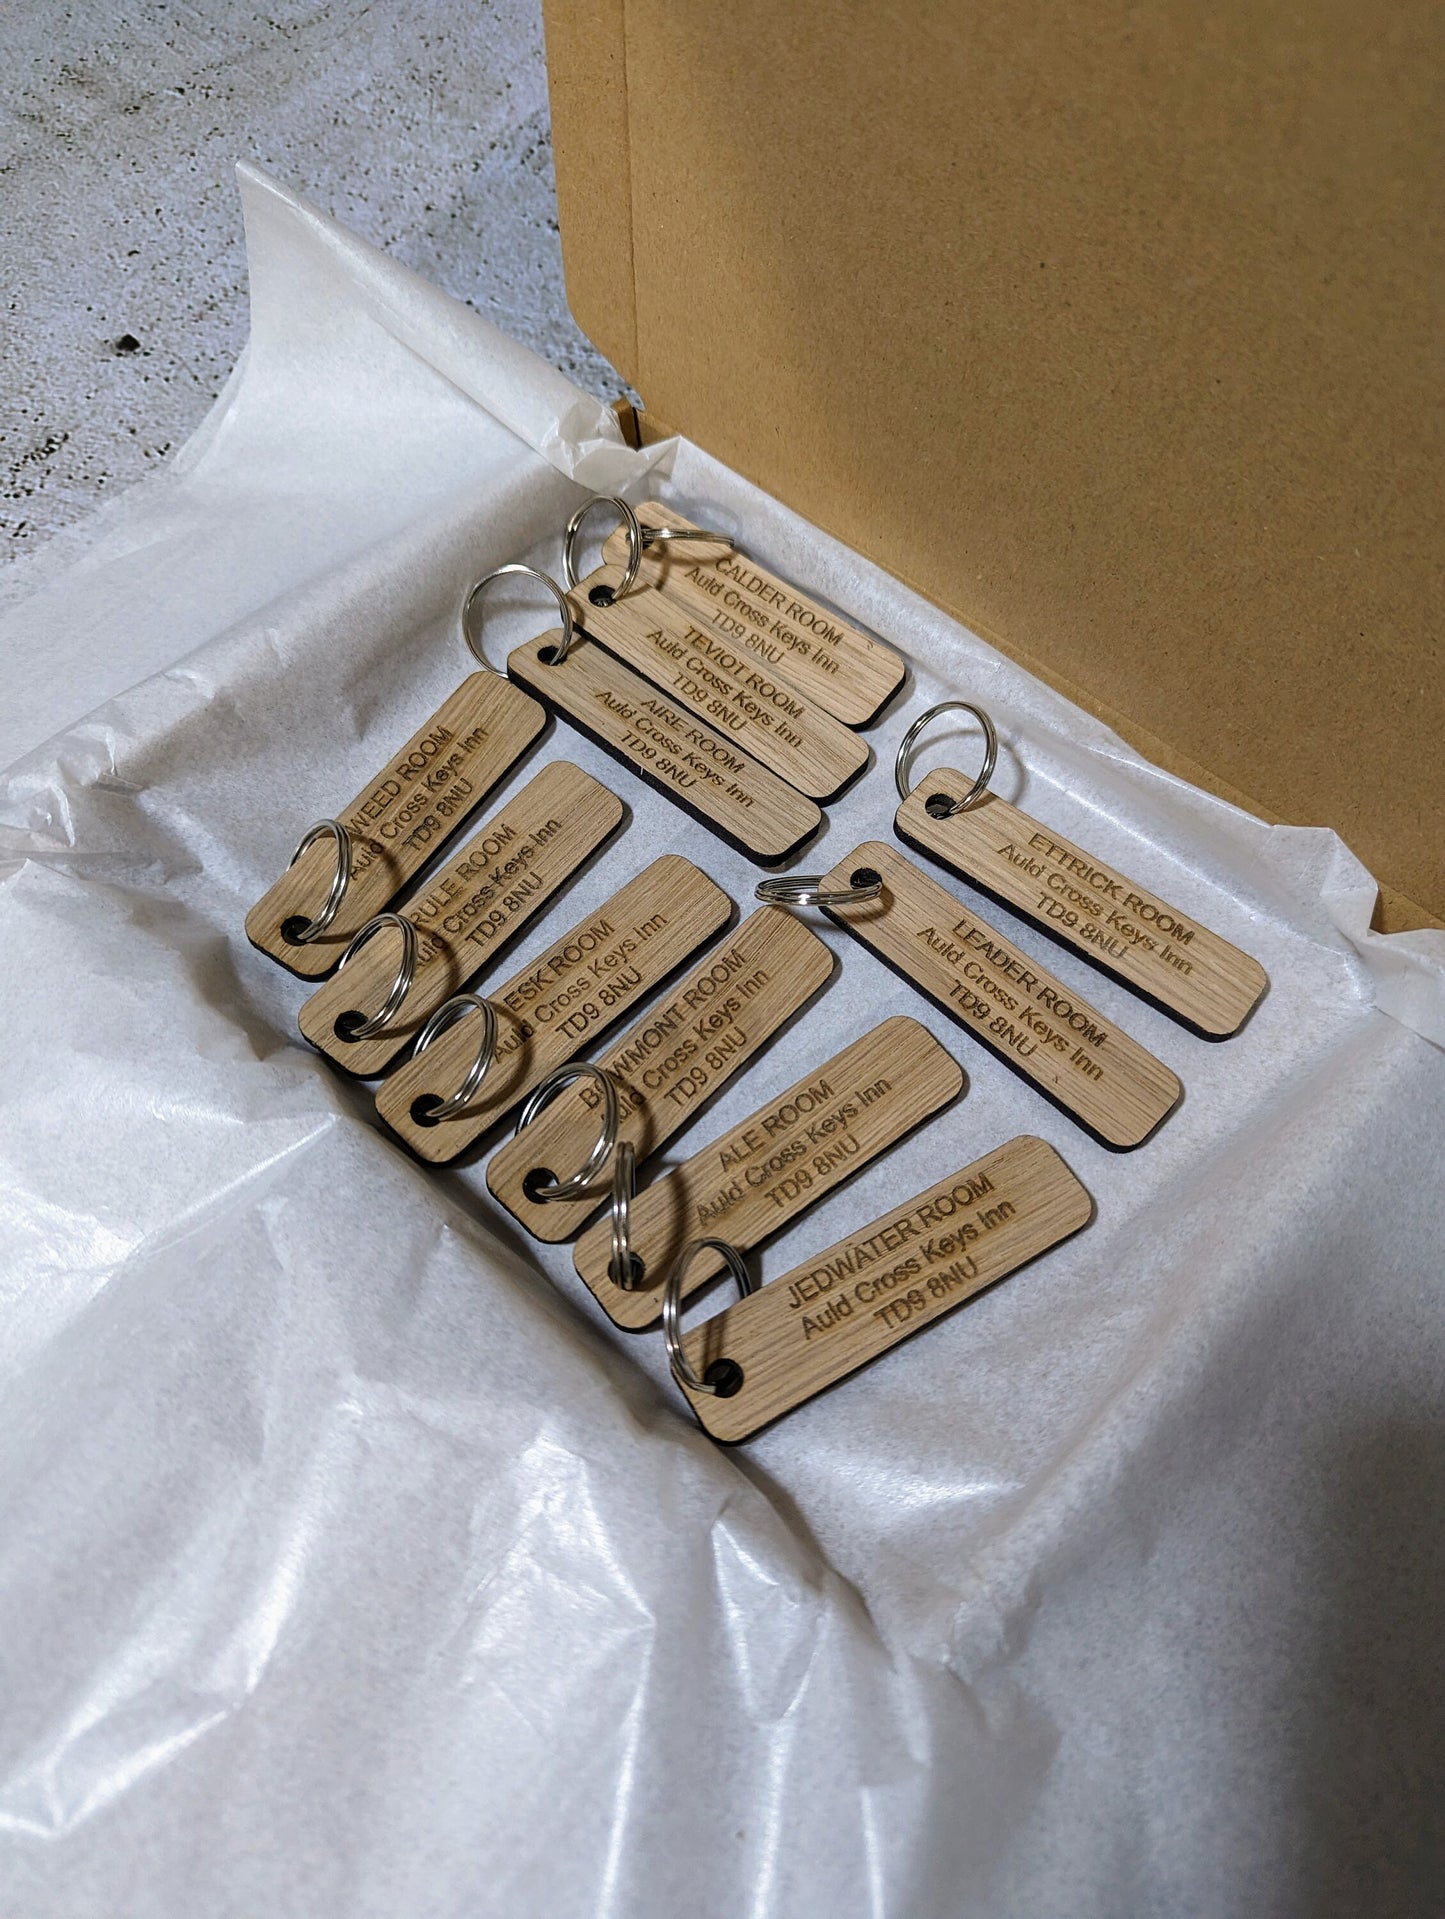 Custom Wooden Room Keyrings for Hotels, B&Bs, Airbnbs, and Guest Houses